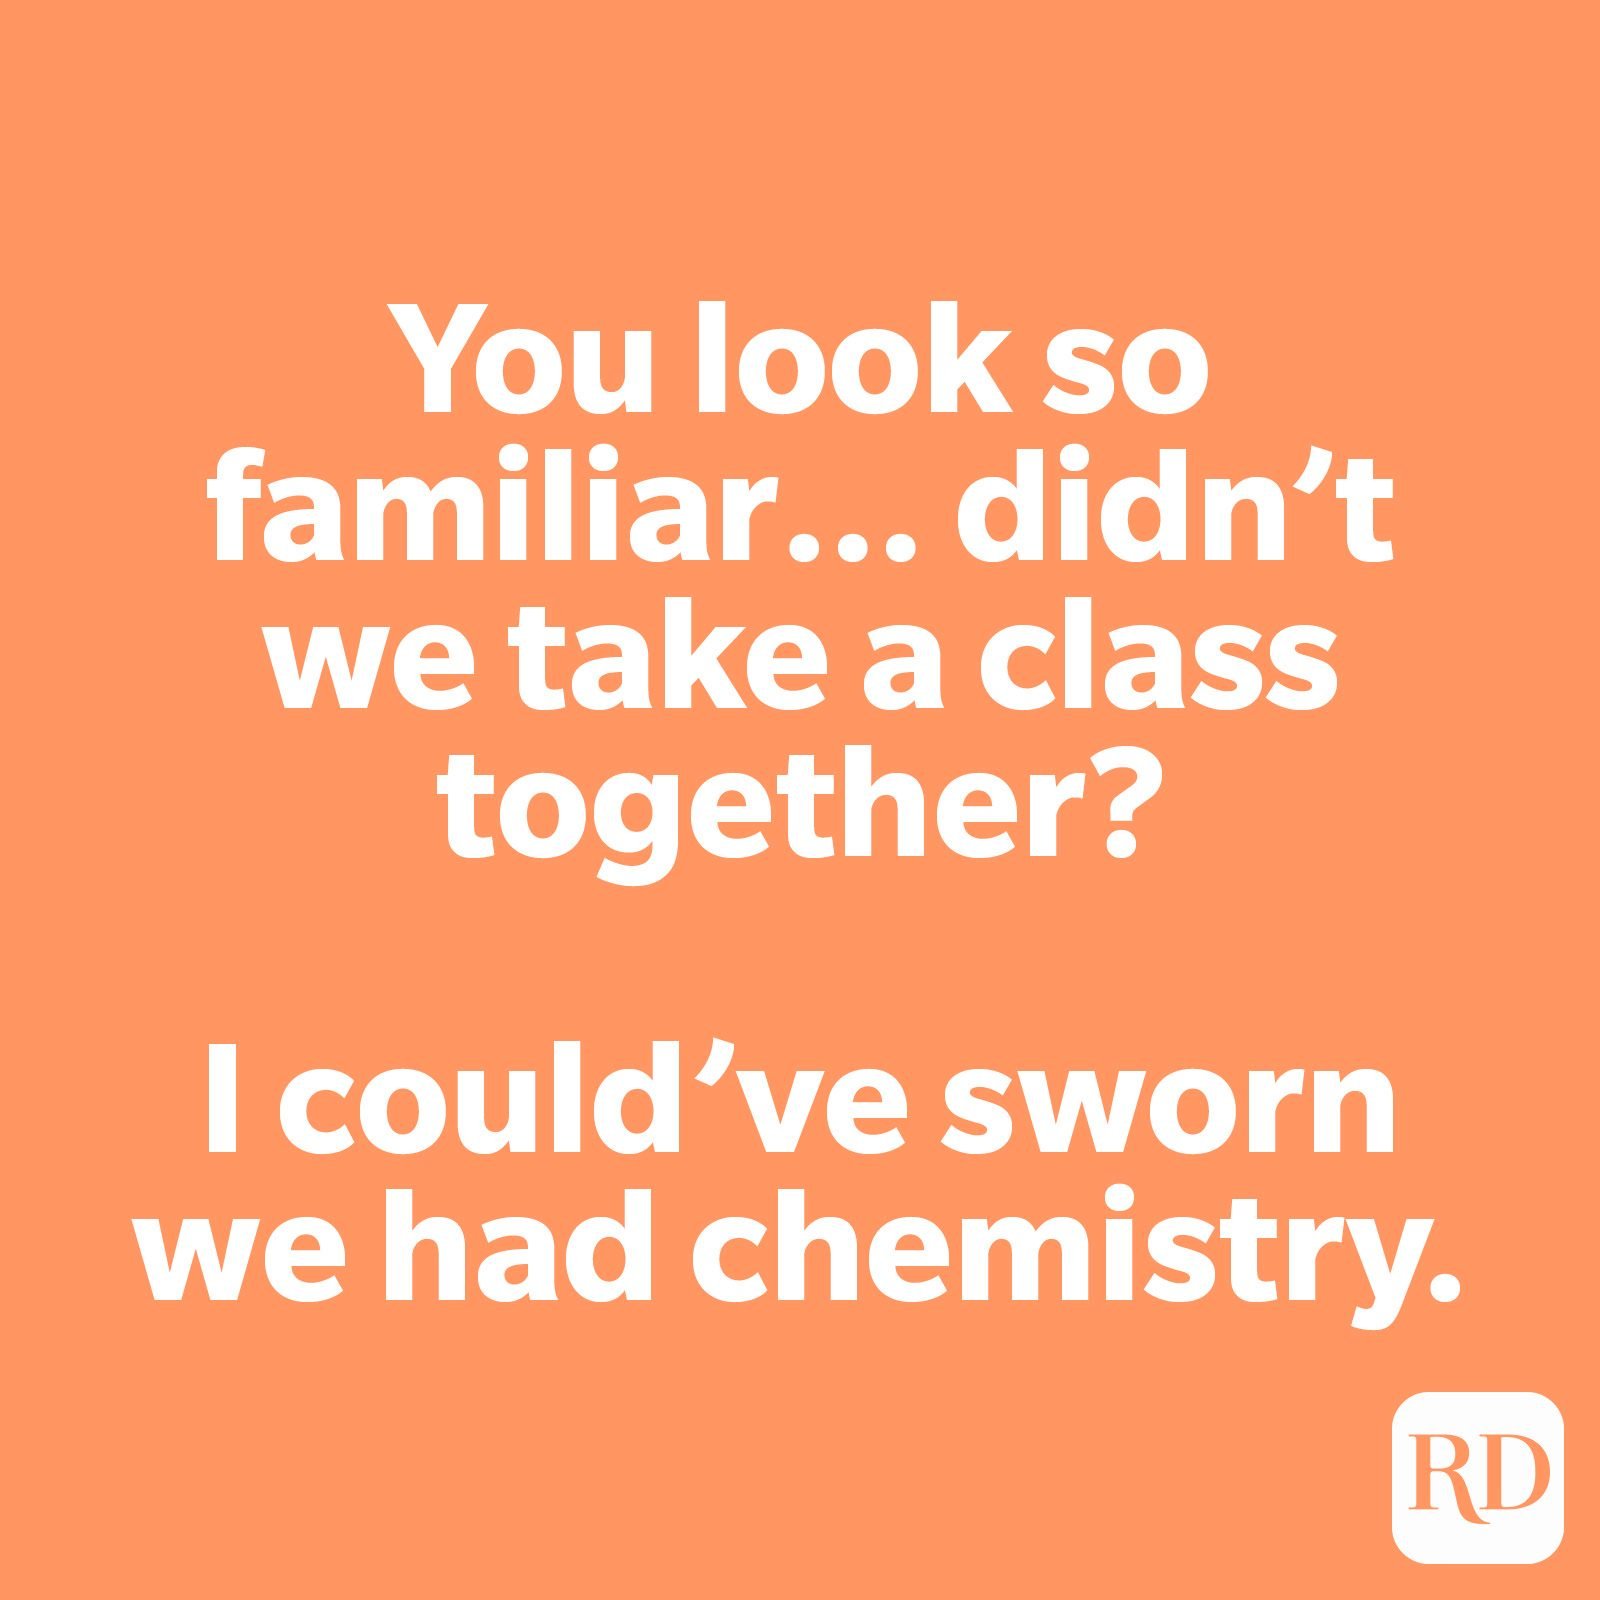 You look so familiar… didn’t we take a class together? I could’ve sworn we had chemistry.